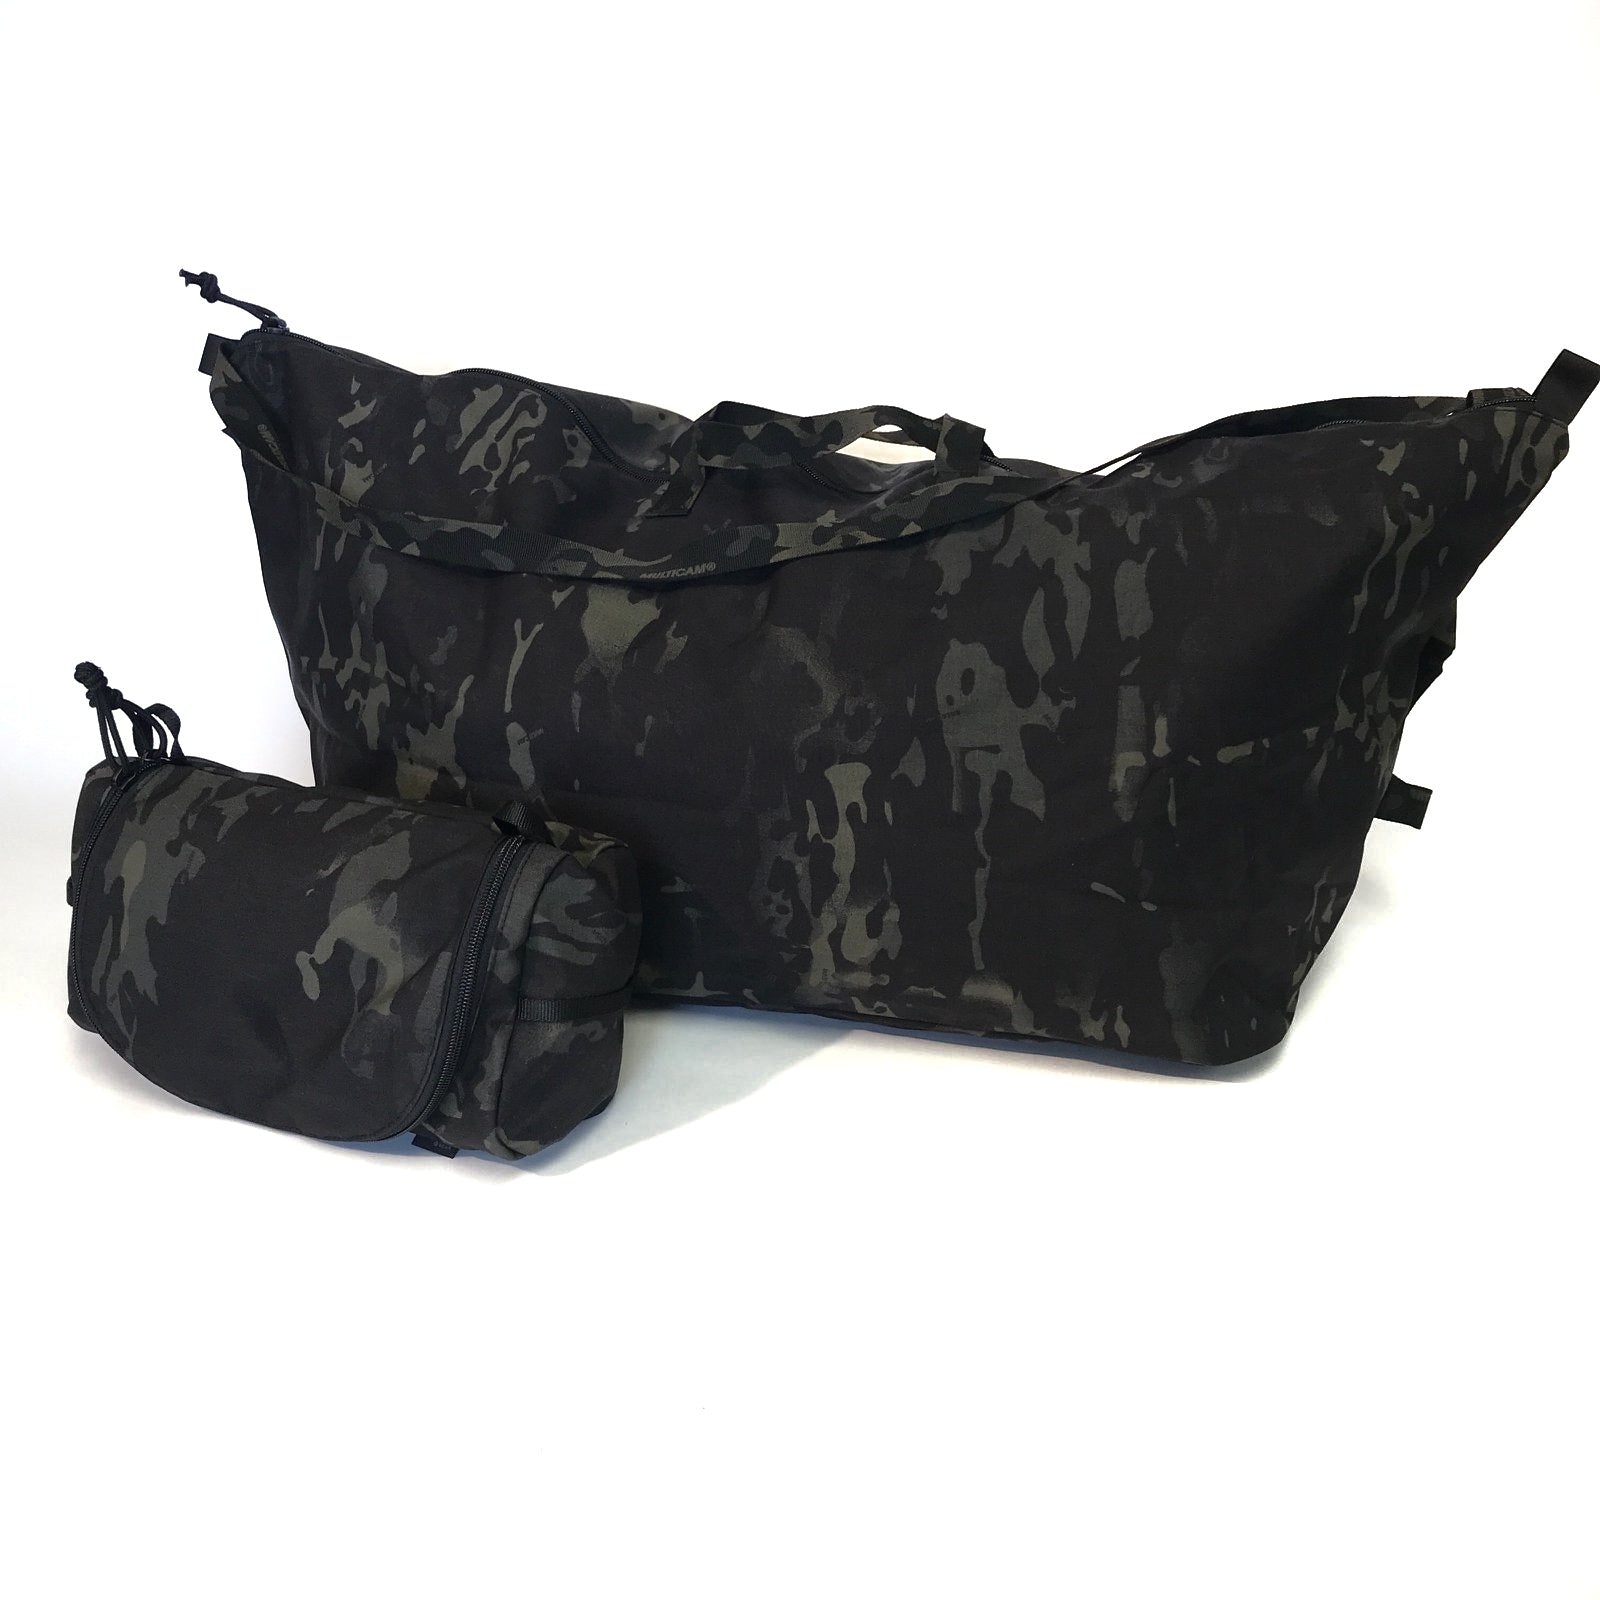 CAMOSTORE - Duffle Bag / Seesack Transportsack in extra großer